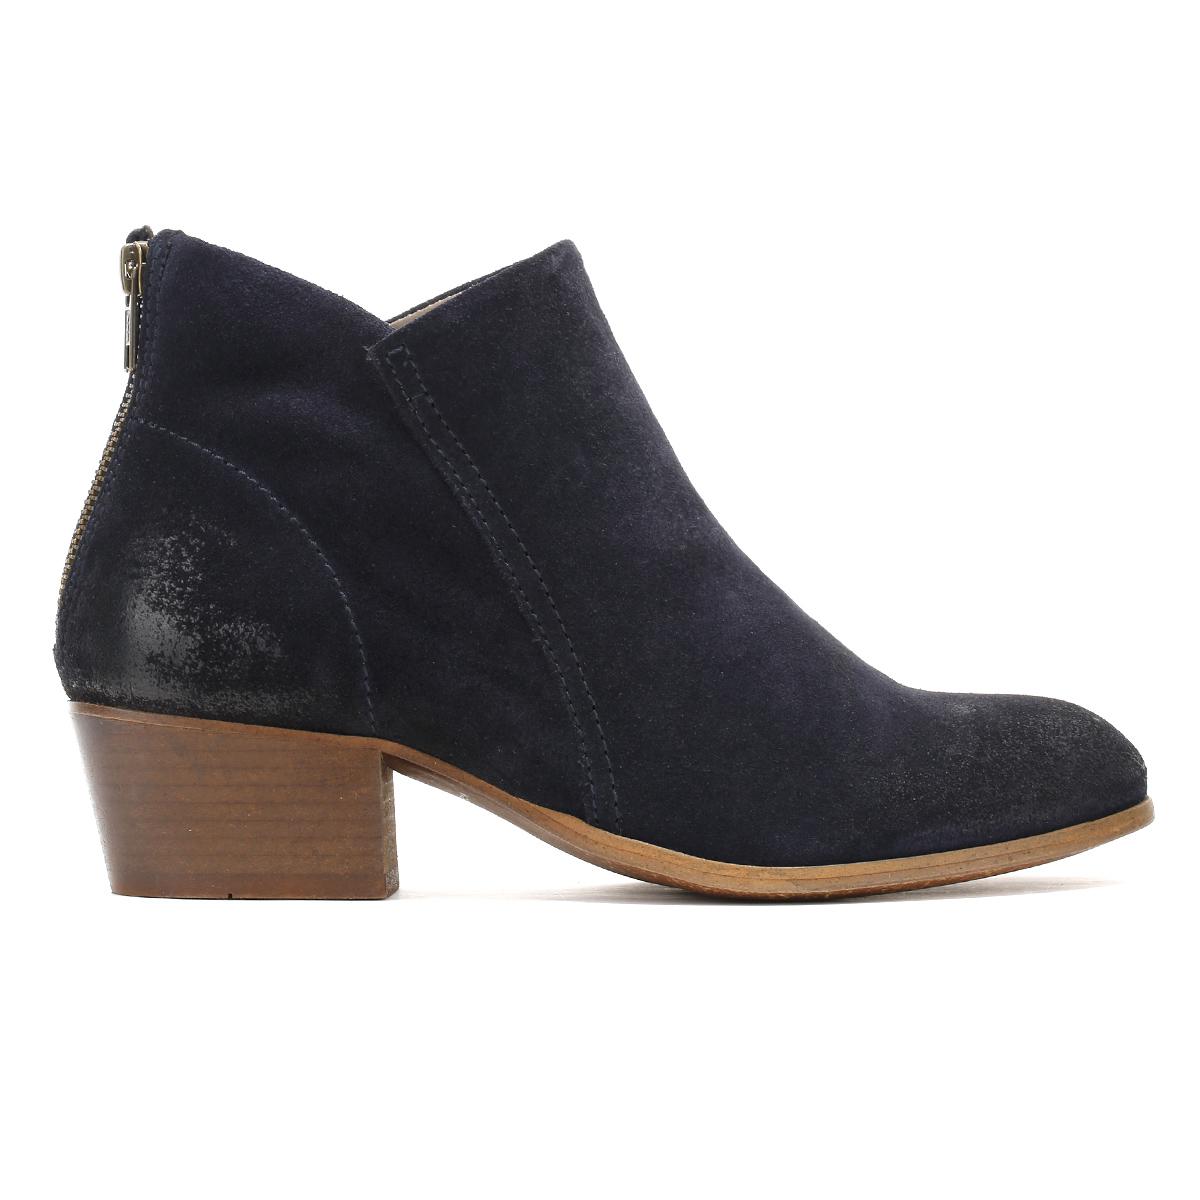 Hudson Jeans Apisi Suede Ankle Boots in Navy (Blue) Lyst